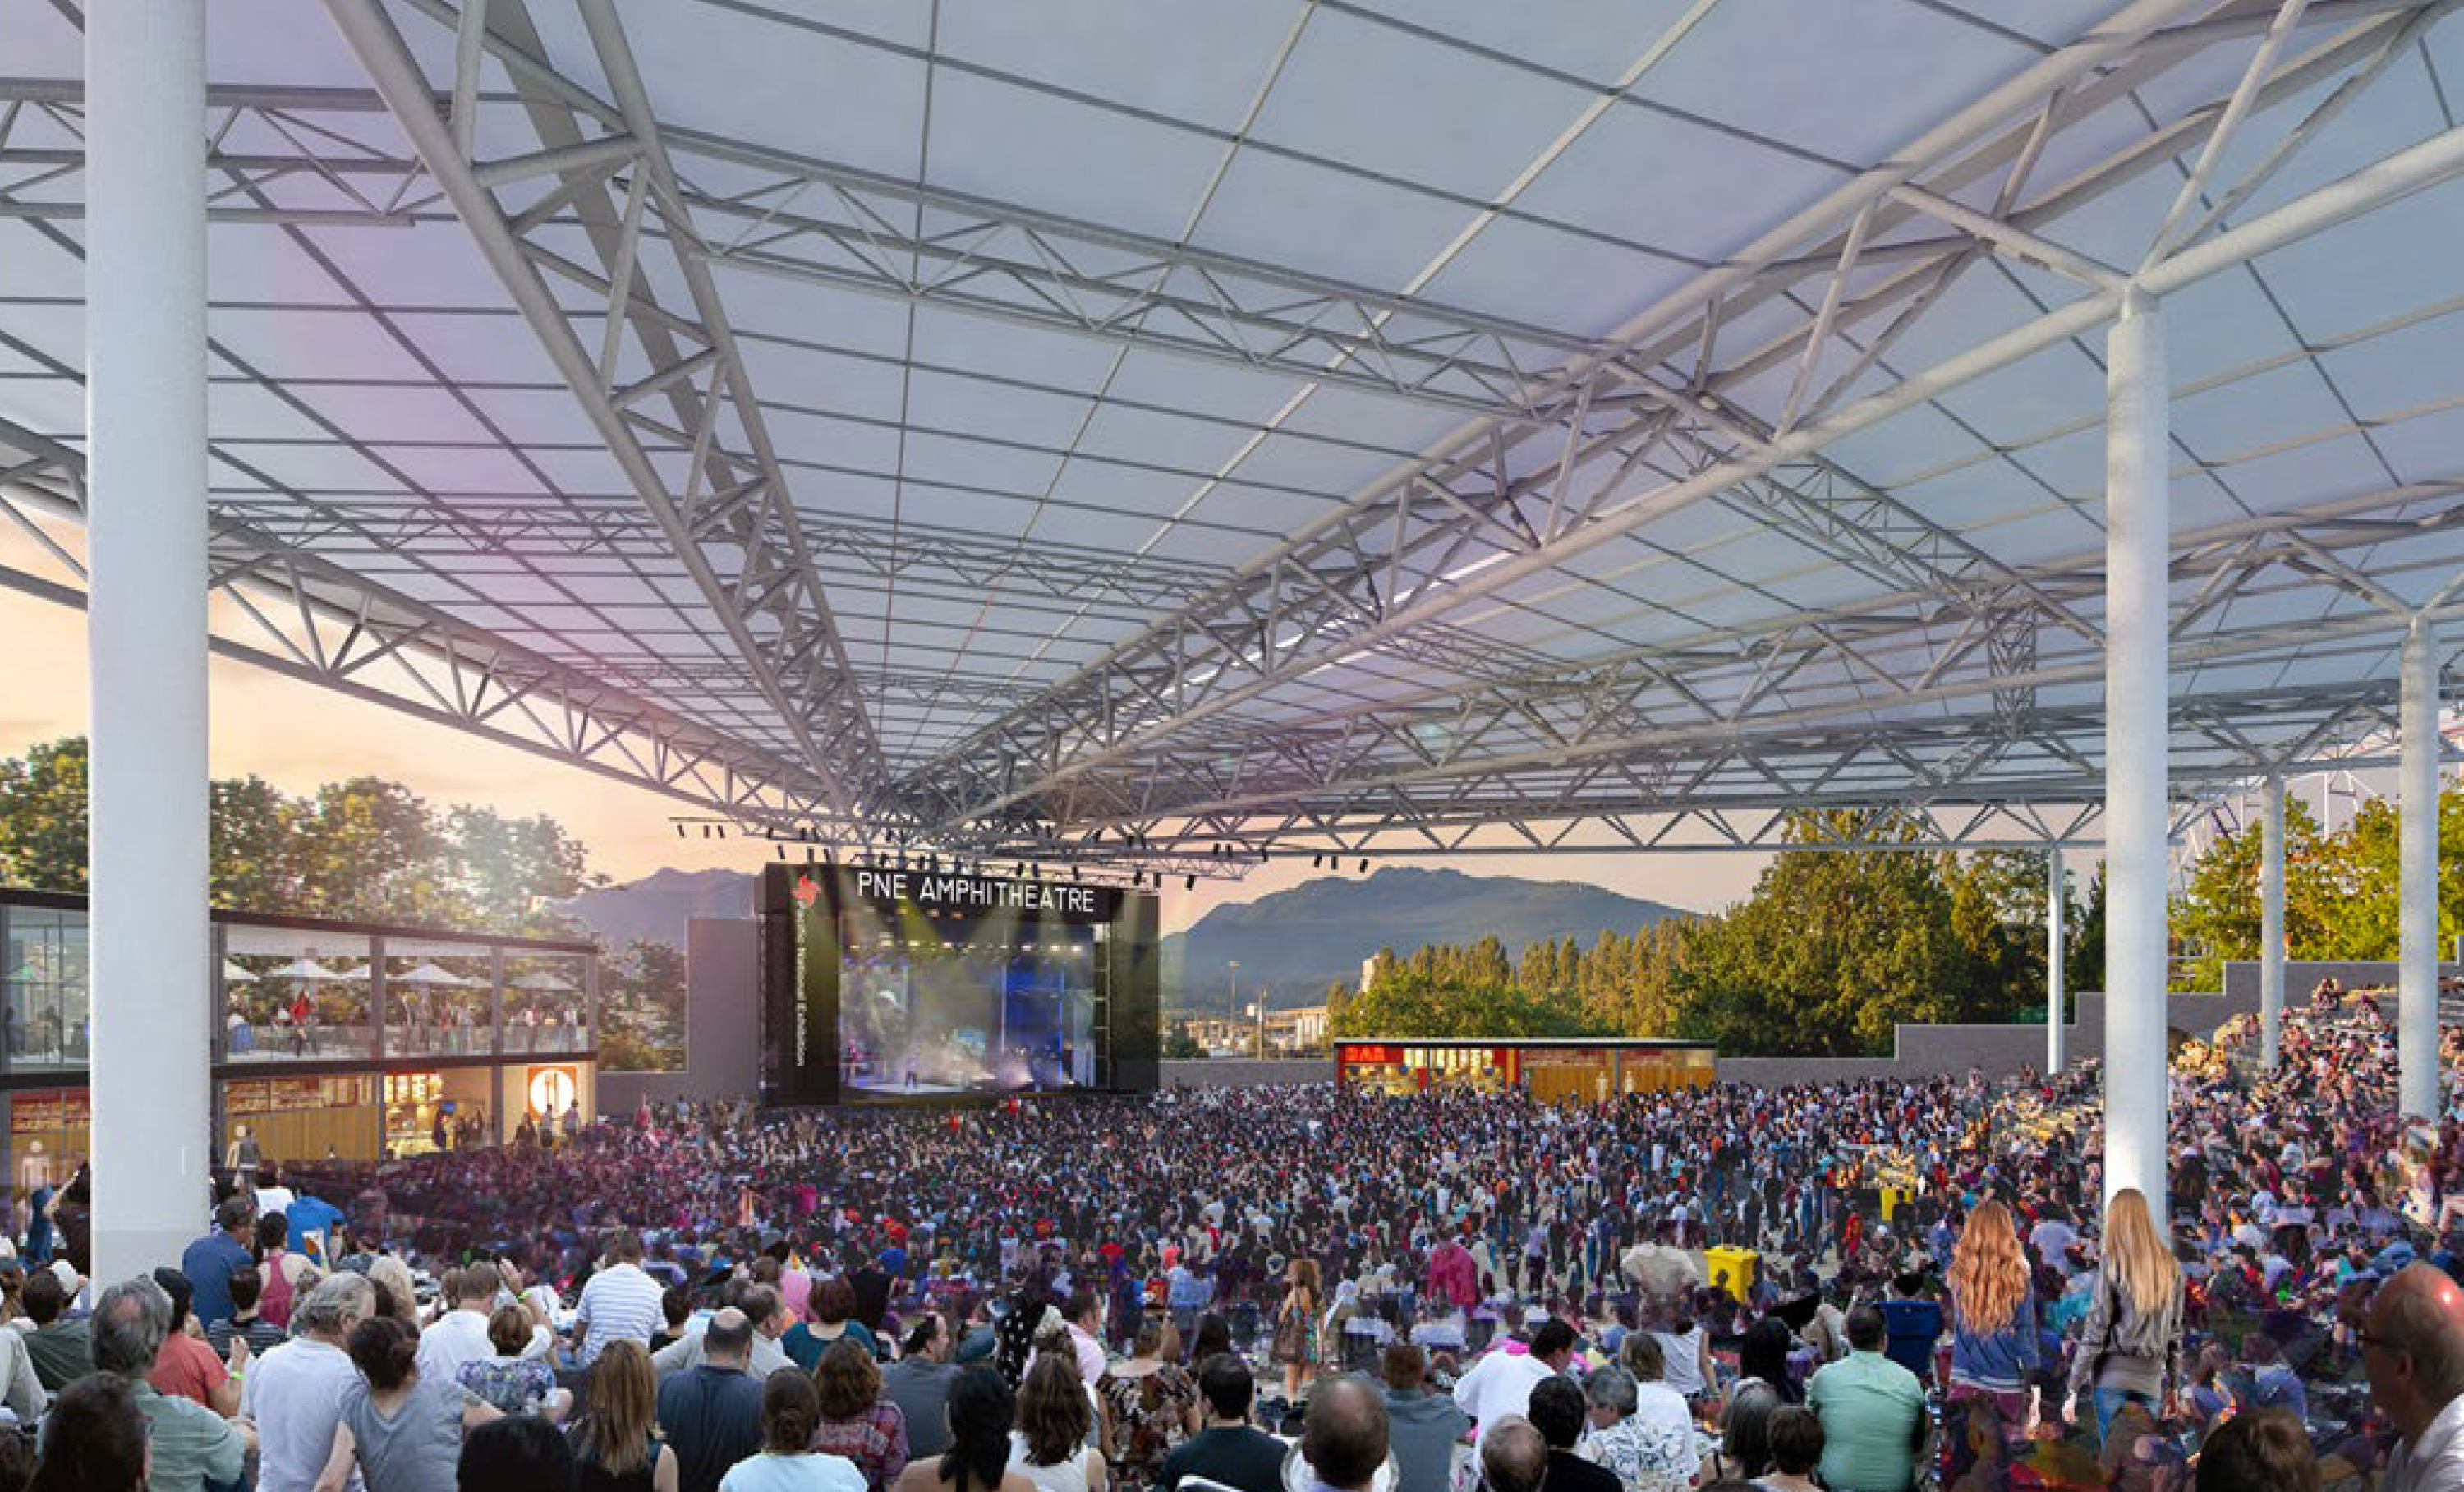 This rendering shows a potential design for the new PNE amphitheatre. The new amphitheatre will be covered, extending the venue’s usability well into the fall and potentially winter months in Vancouver, says Shelley Frost, chief executive officer of the PNE.